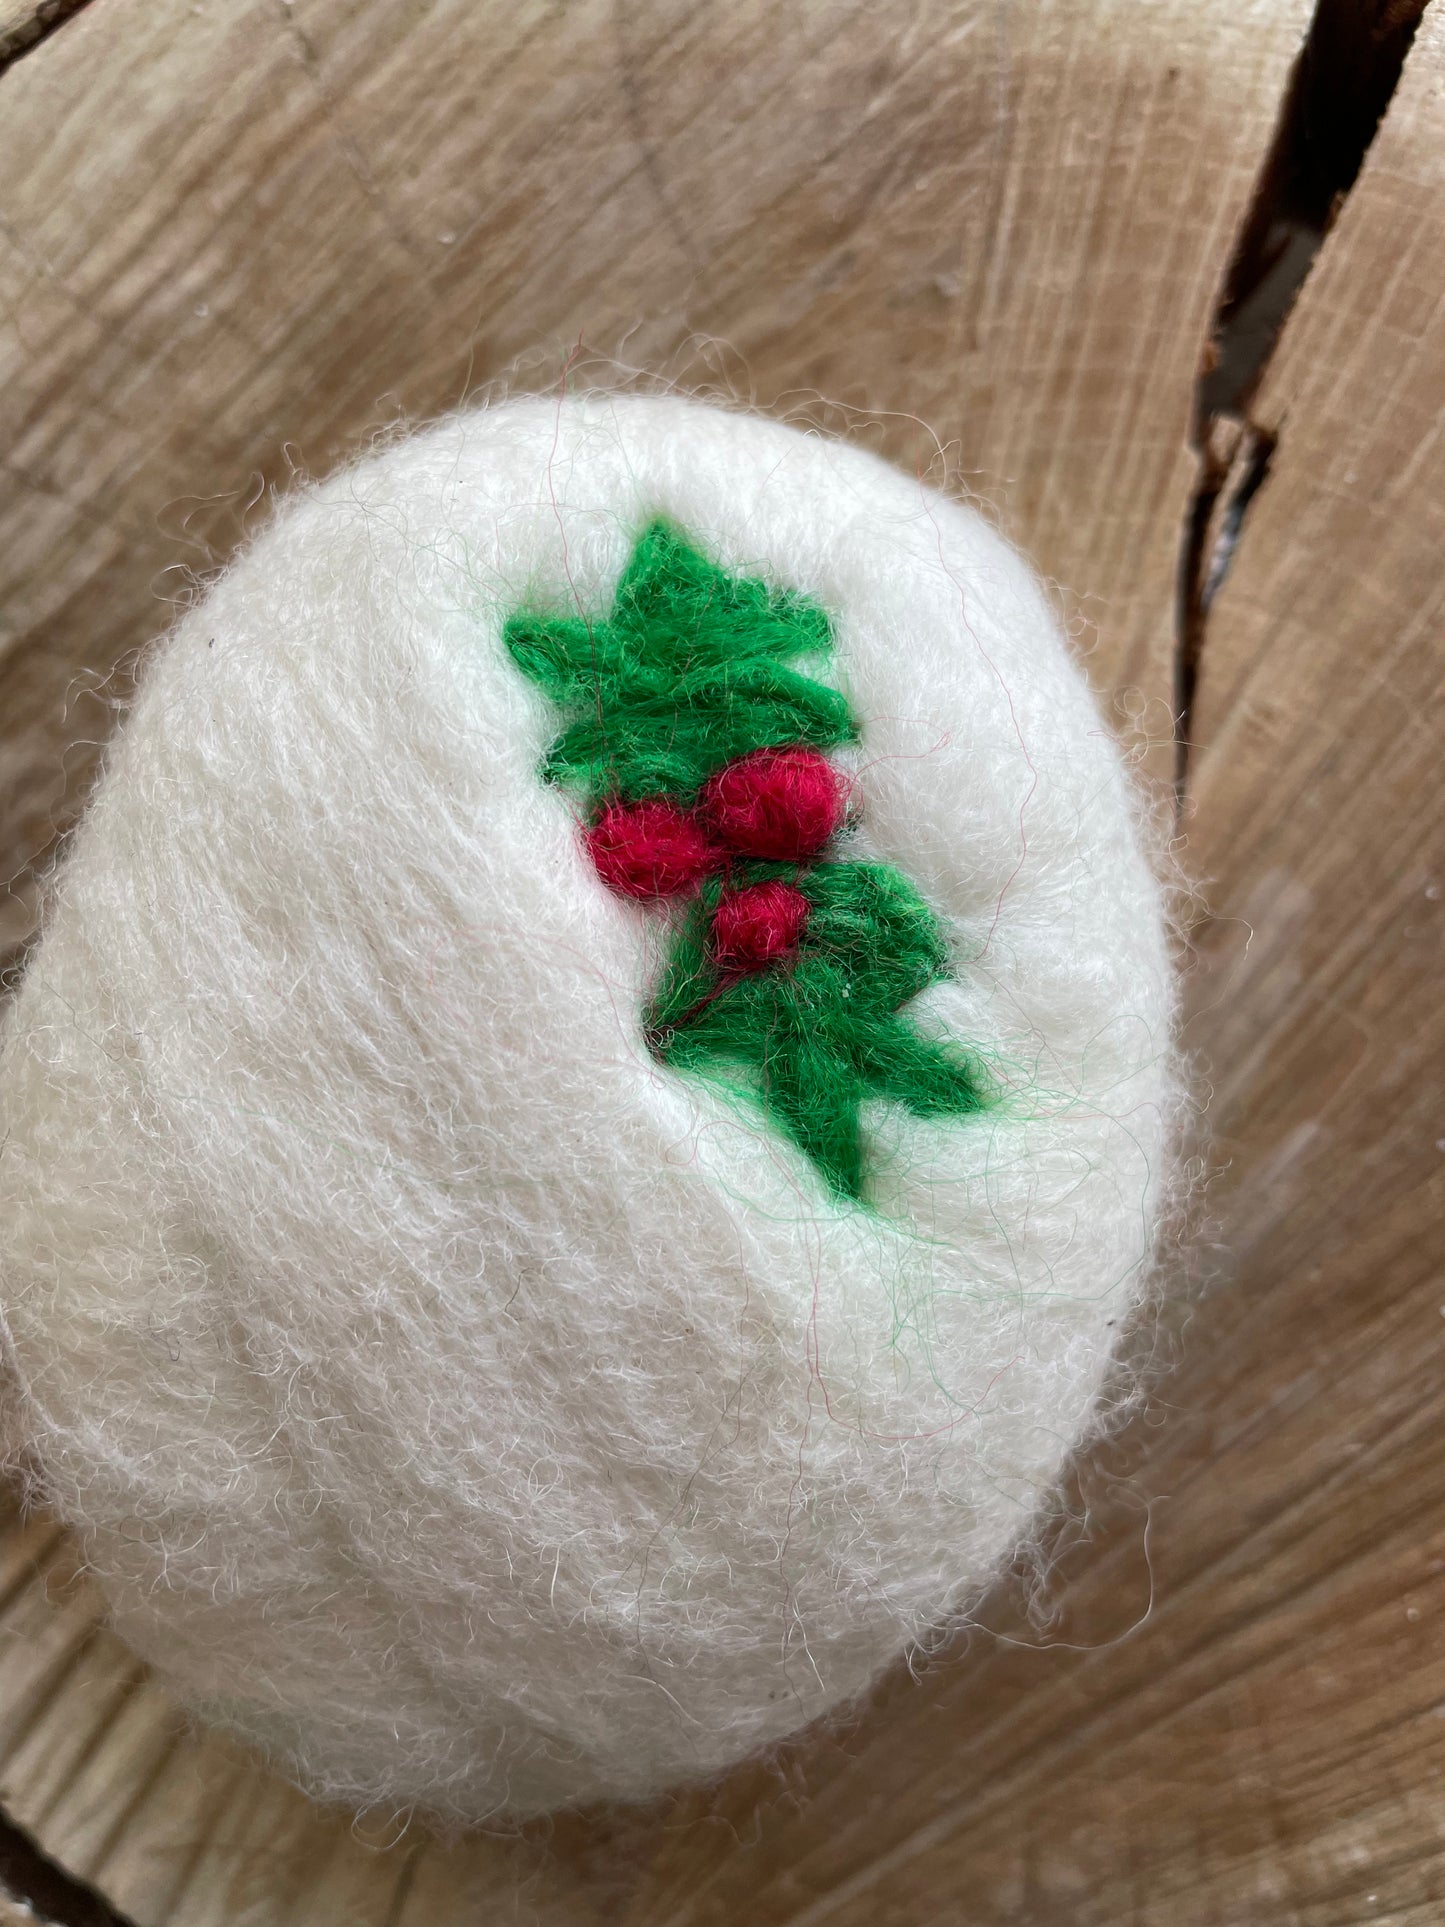 Felted Christmas soap